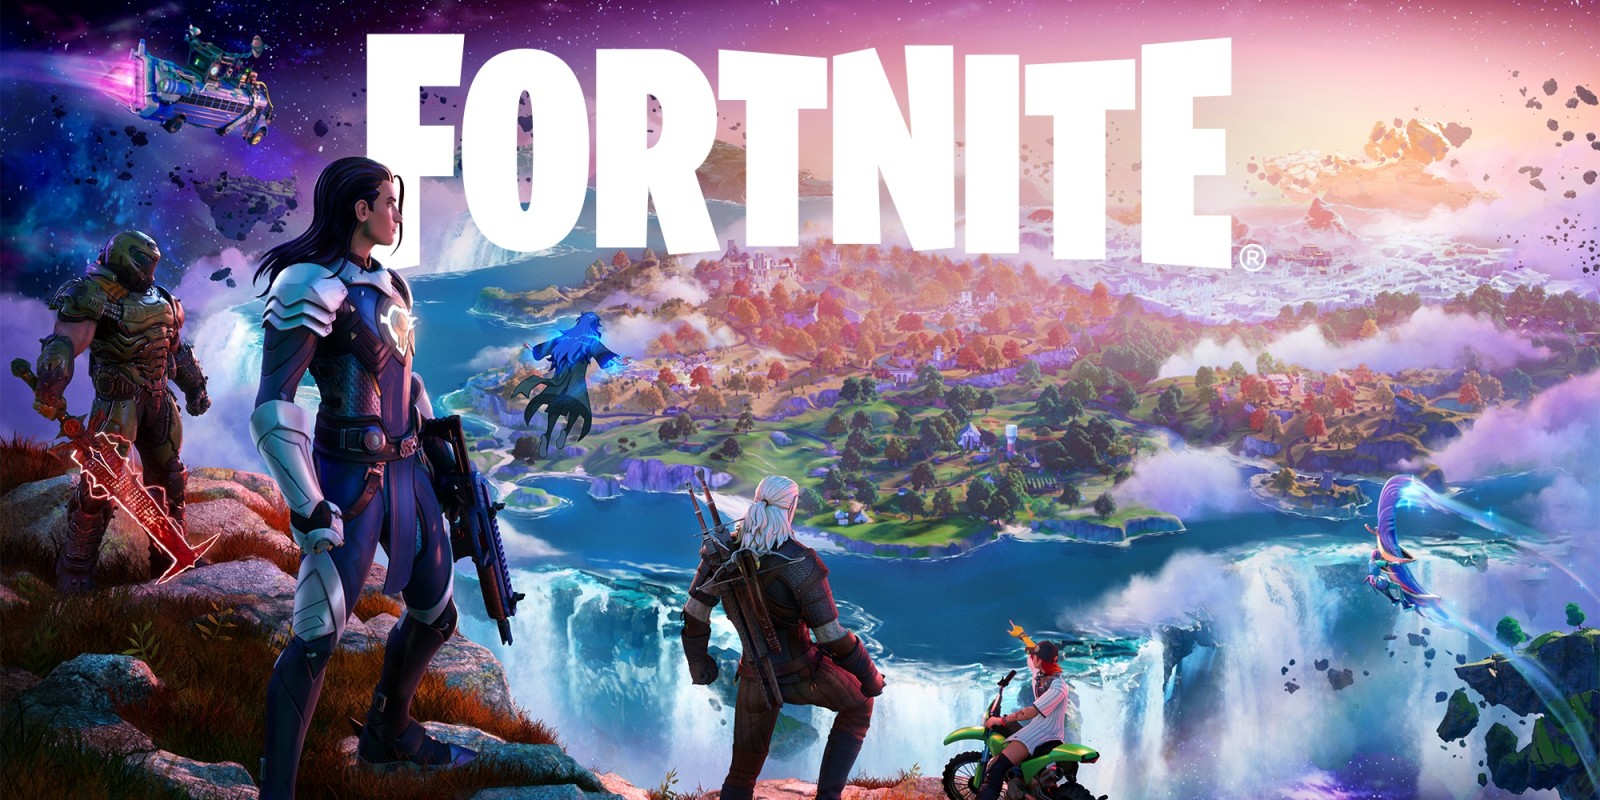 Playing Fortnite on Xbox Cloud Gaming